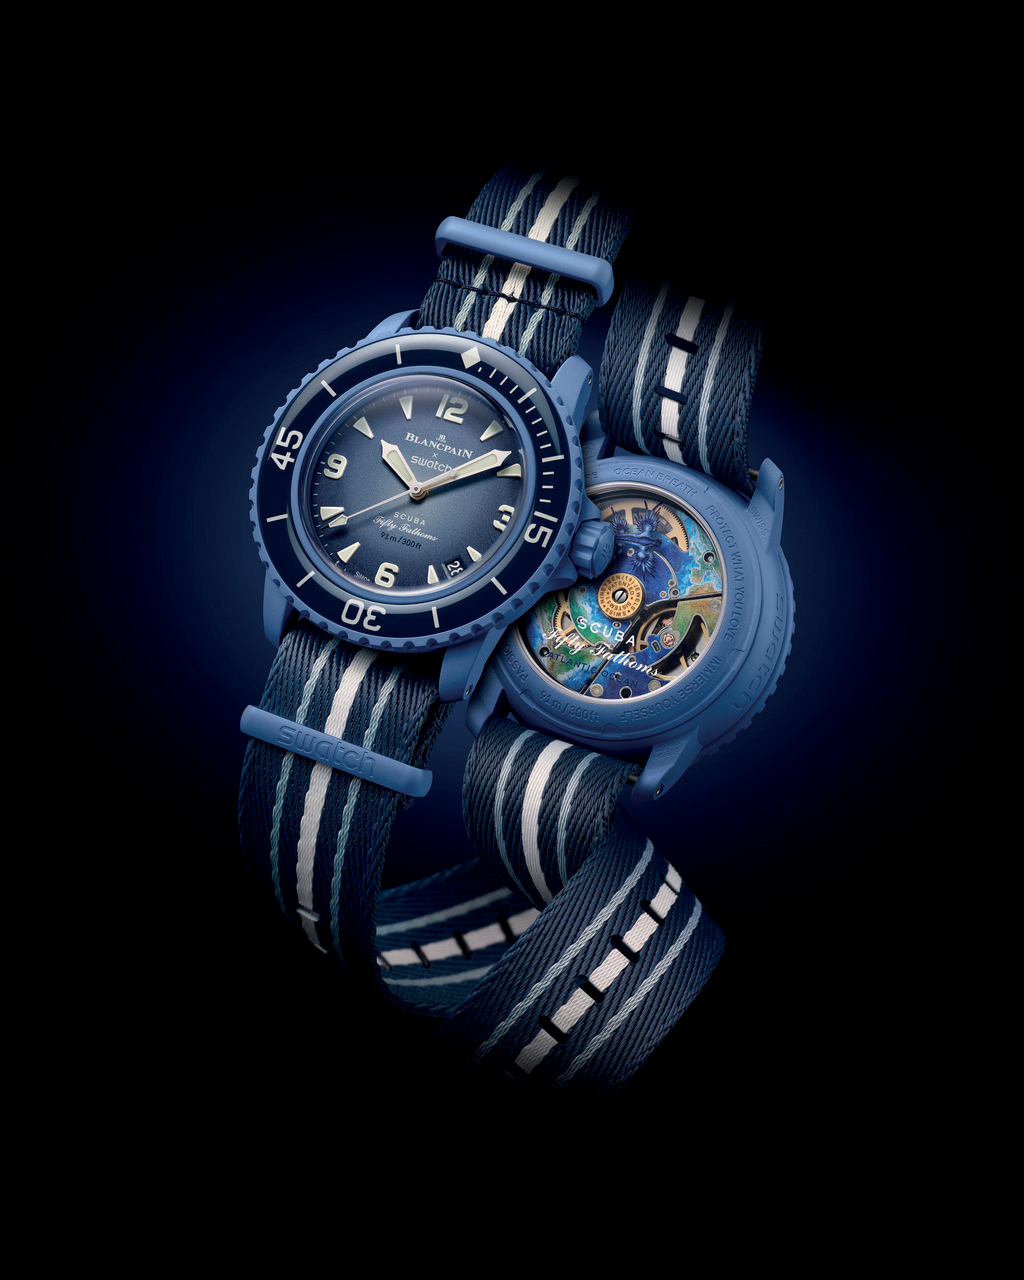 Swatch Unveils the Swatch Bioceramic Scuba Fifty Fathoms as a Tribute to the Blancpain Fifty Fathoms